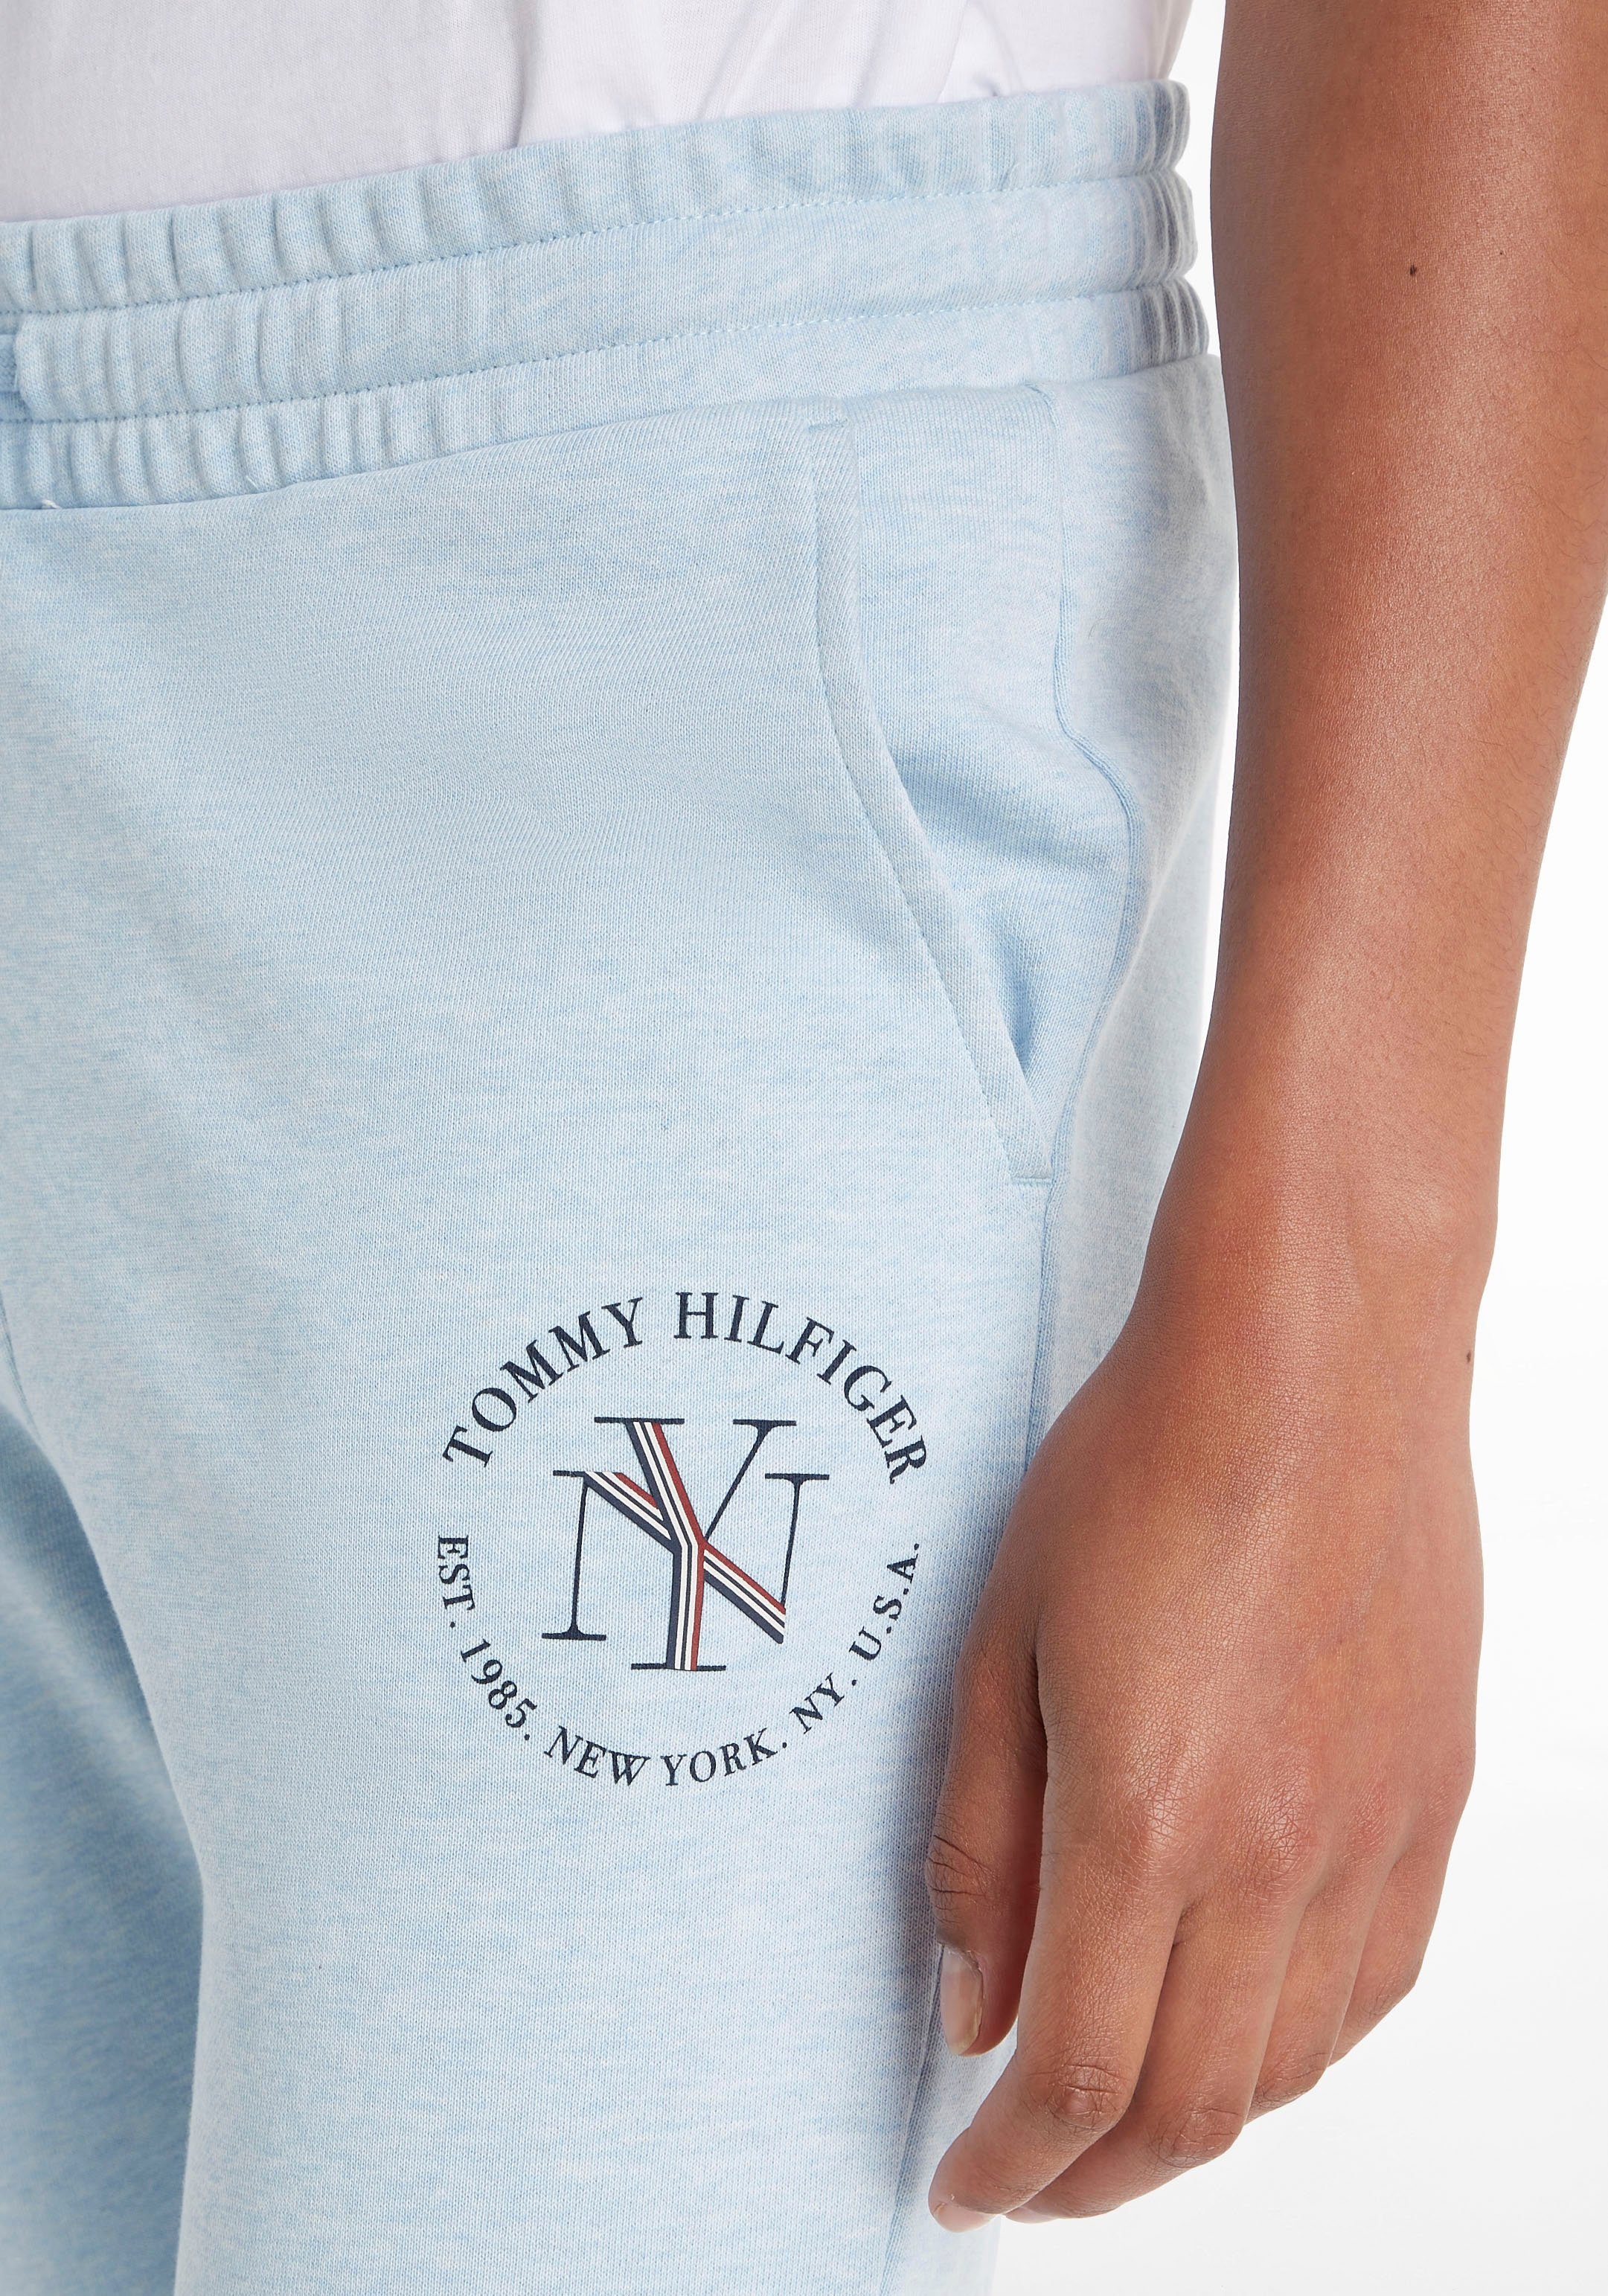 SWEATPANTS Breezy-Blue-Heather TAPERED ROUNDALL Tommy Markenlabel Tommy Sweatpants mit Hilfiger NYC Hilfiger